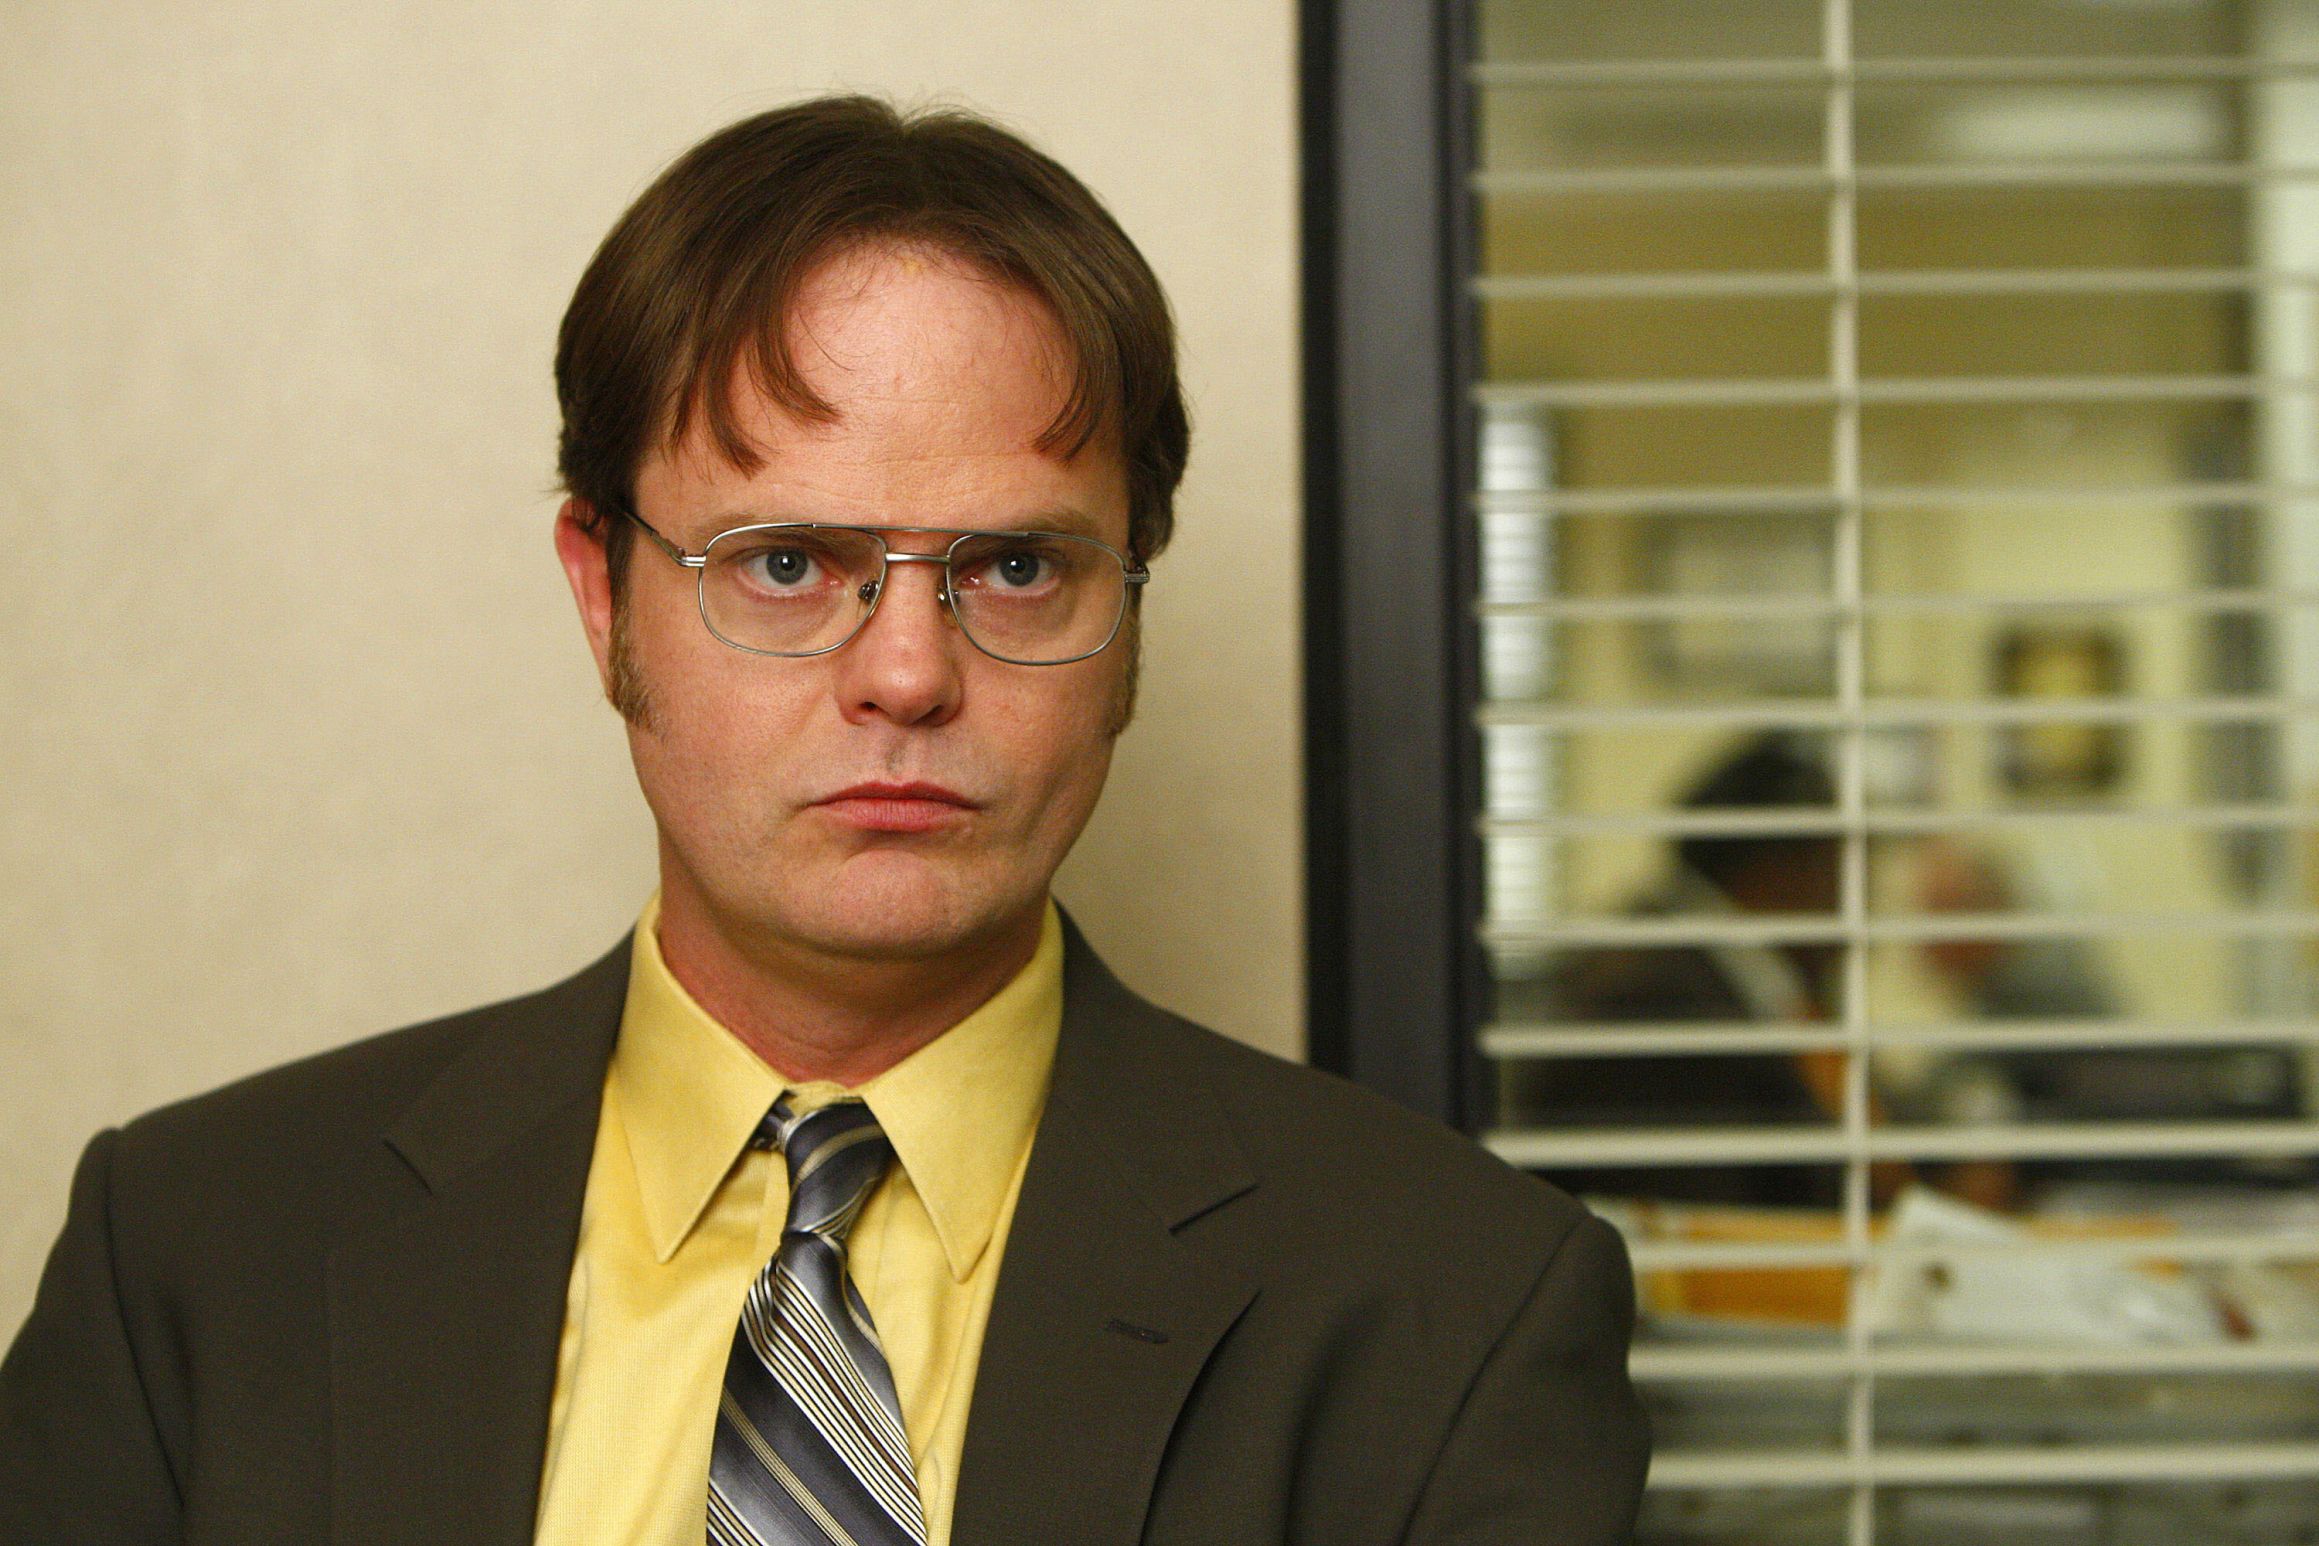 Dwight Schrute interview high res Blank Template - Imgflip